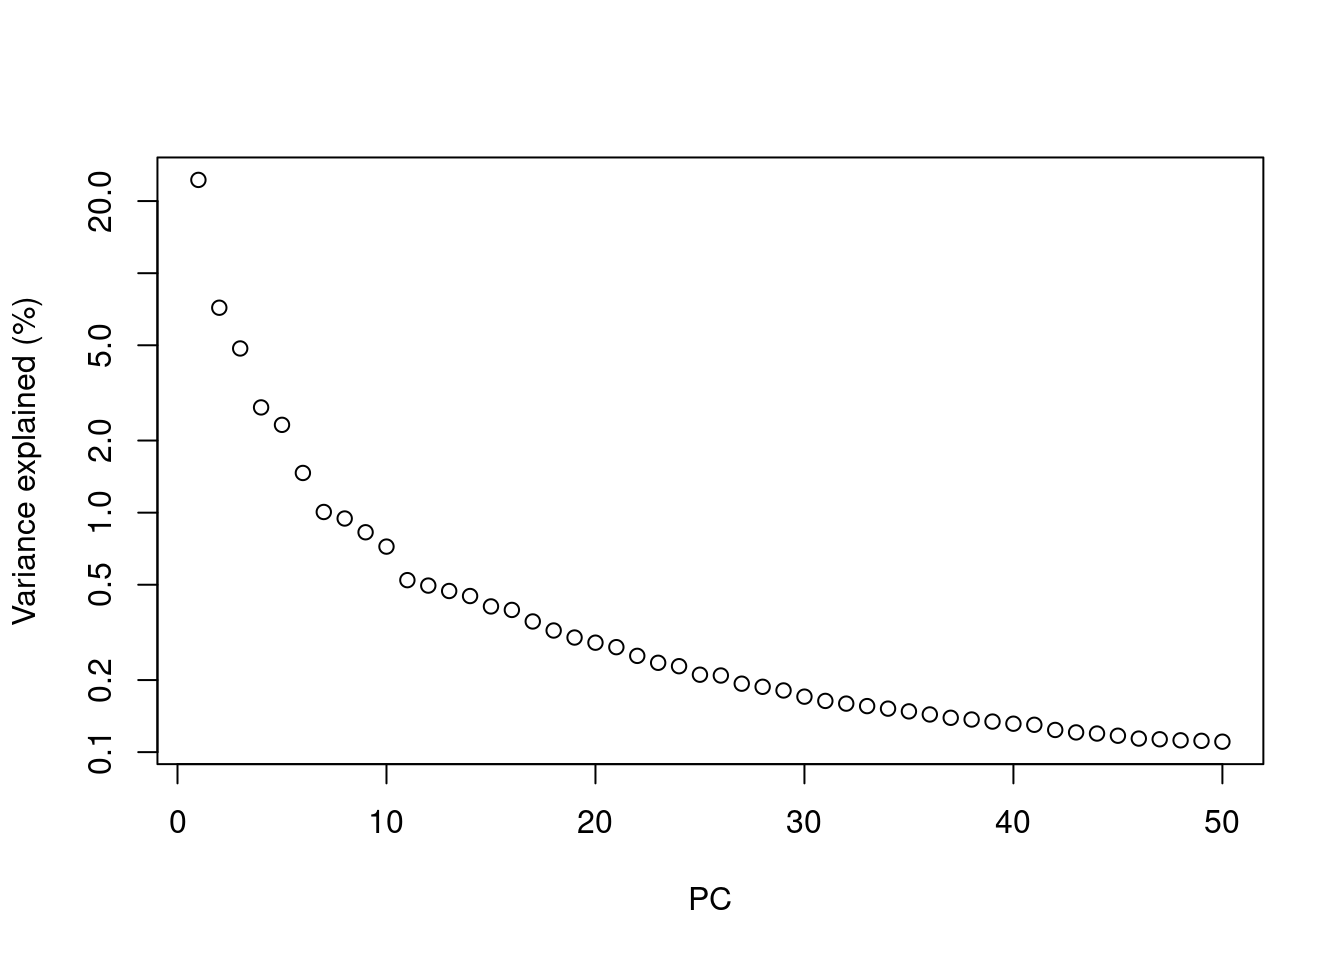 Percentage of variance explained by successive PCs in the Zeisel dataset, shown on a log-scale for visualization purposes.